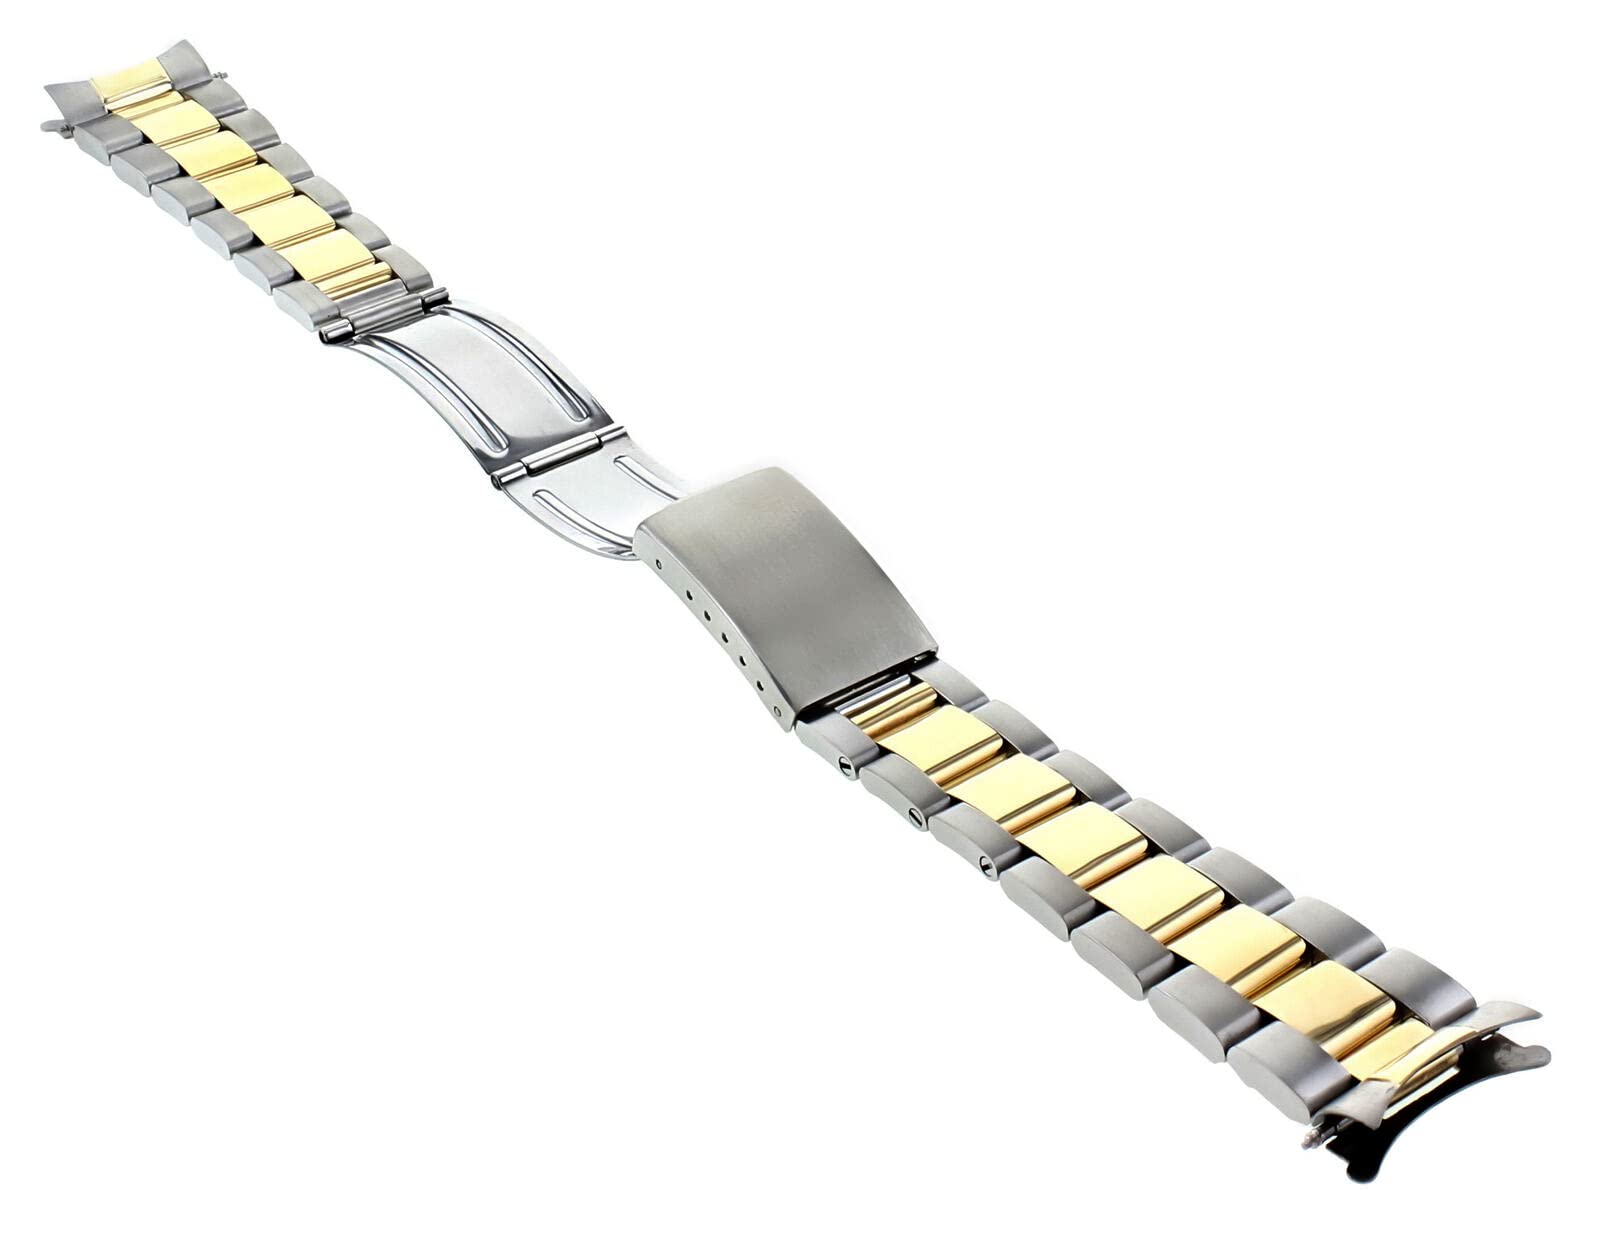 Ewatchparts OYSTER WATCHBAND COMPATIBLE WITH ROLEX DATEJUST 16013 16014 16233 16234 REAL GOLD 14K/S 20MM